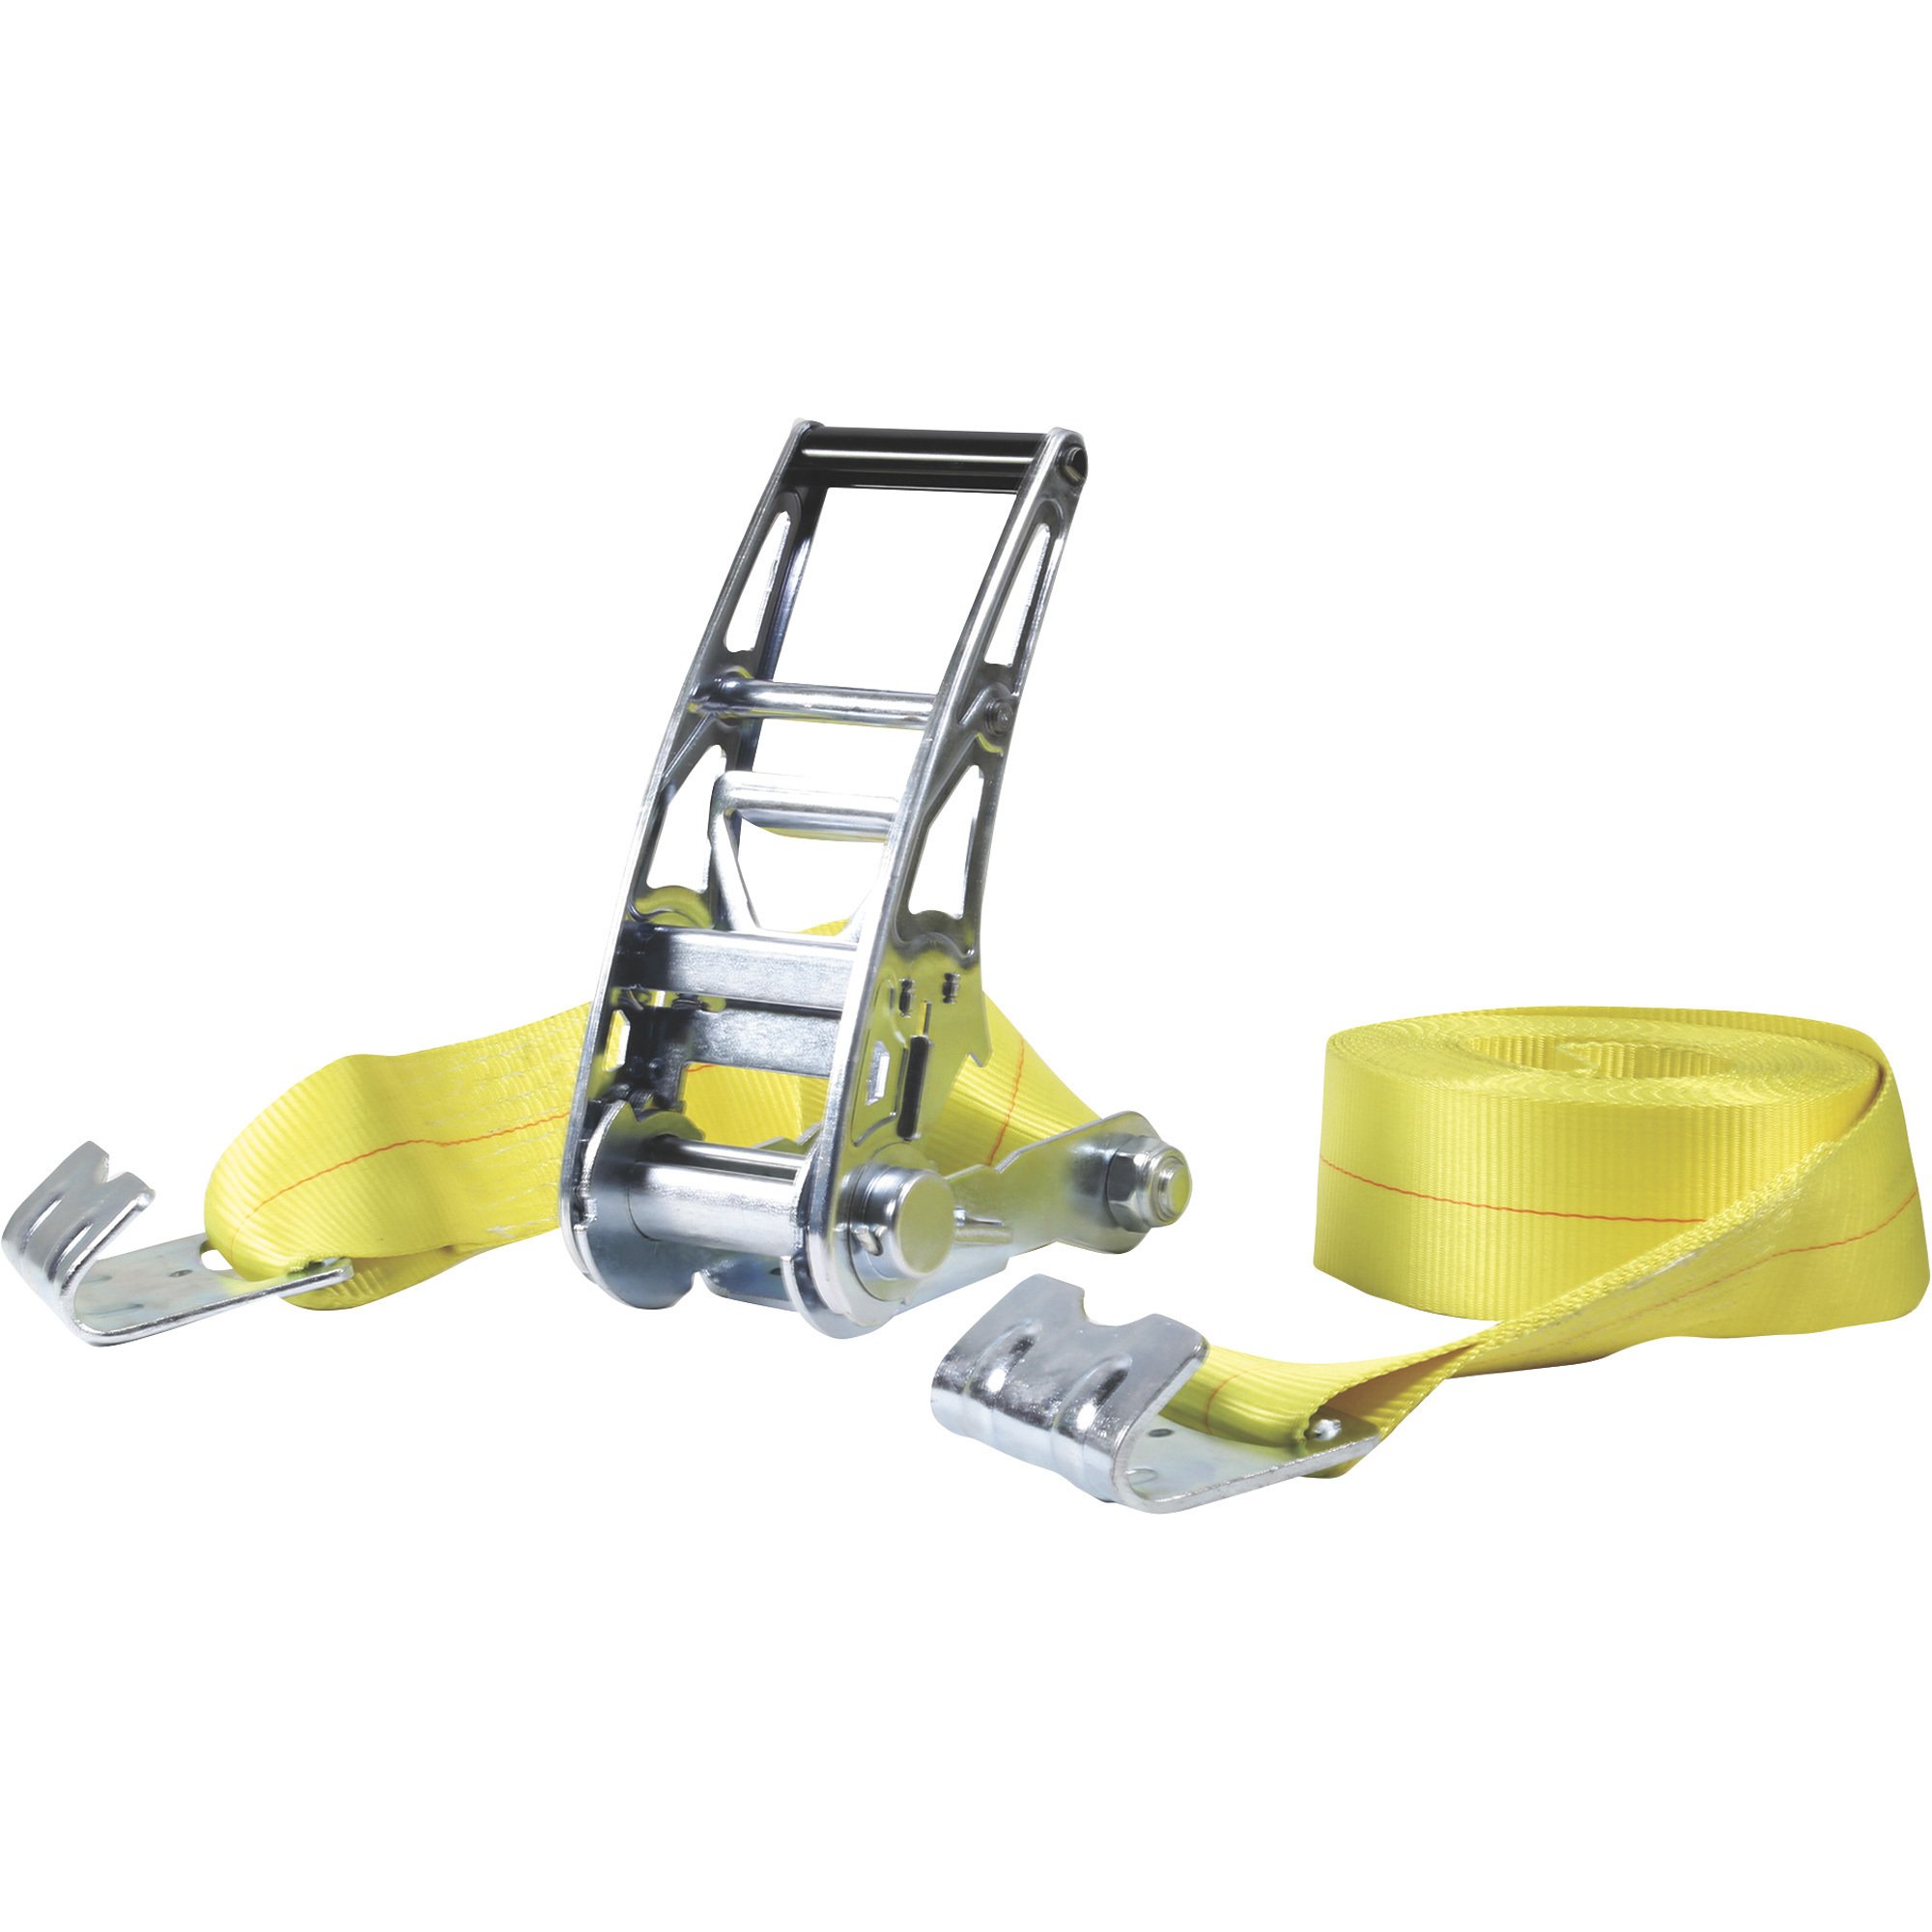 SmartStraps Commercial-Grade Stamped Ratchet Tie-Down Strap, 3Inch x 27ft., with Flat Hook, 15,000-Lb. Breaking Strength, Model 4518